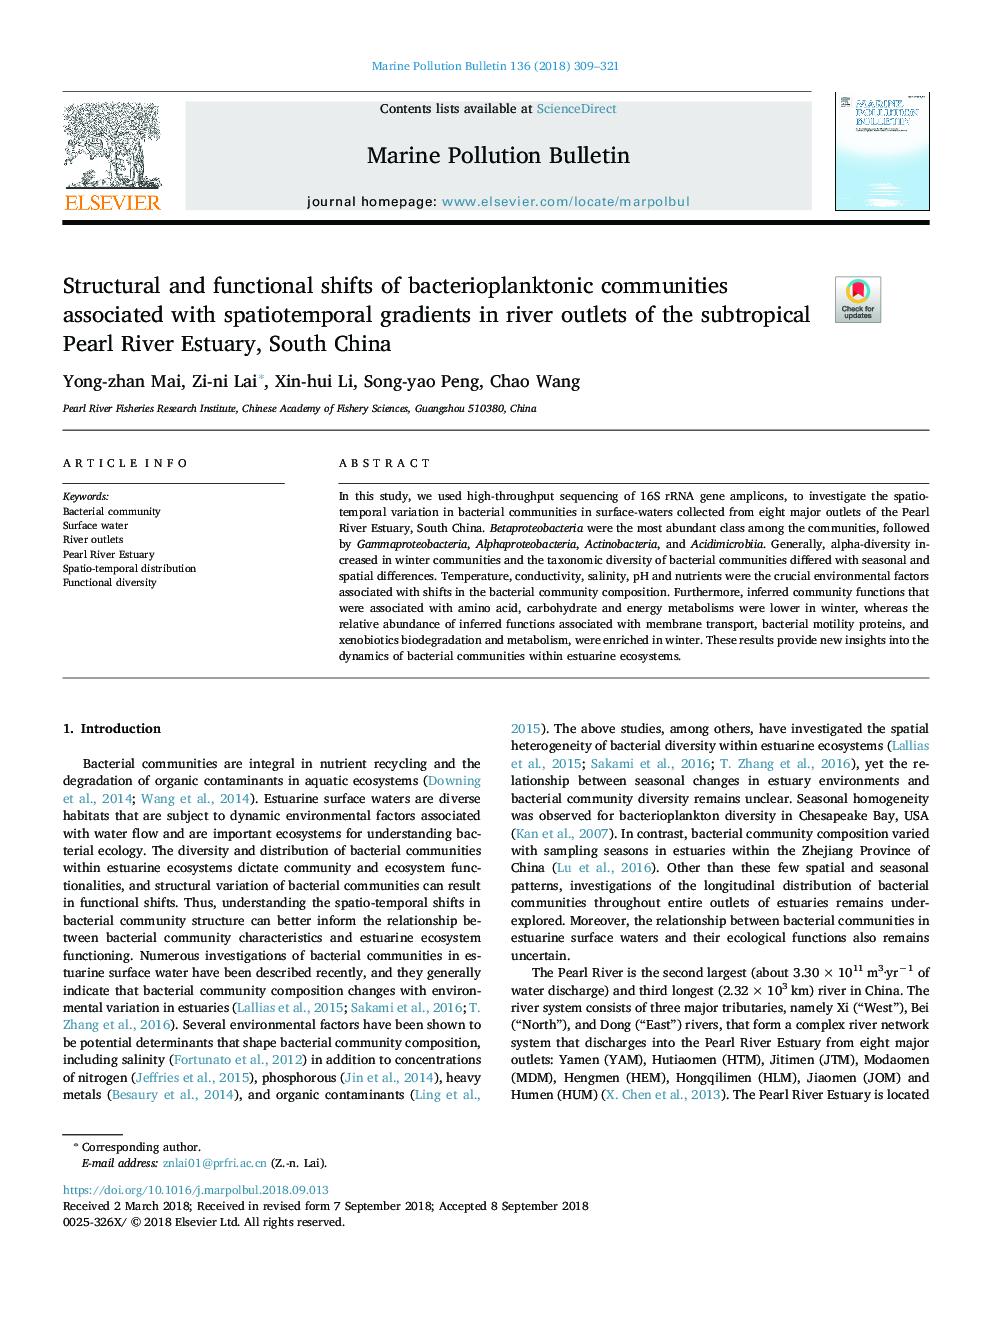 Structural and functional shifts of bacterioplanktonic communities associated with spatiotemporal gradients in river outlets of the subtropical Pearl River Estuary, South China